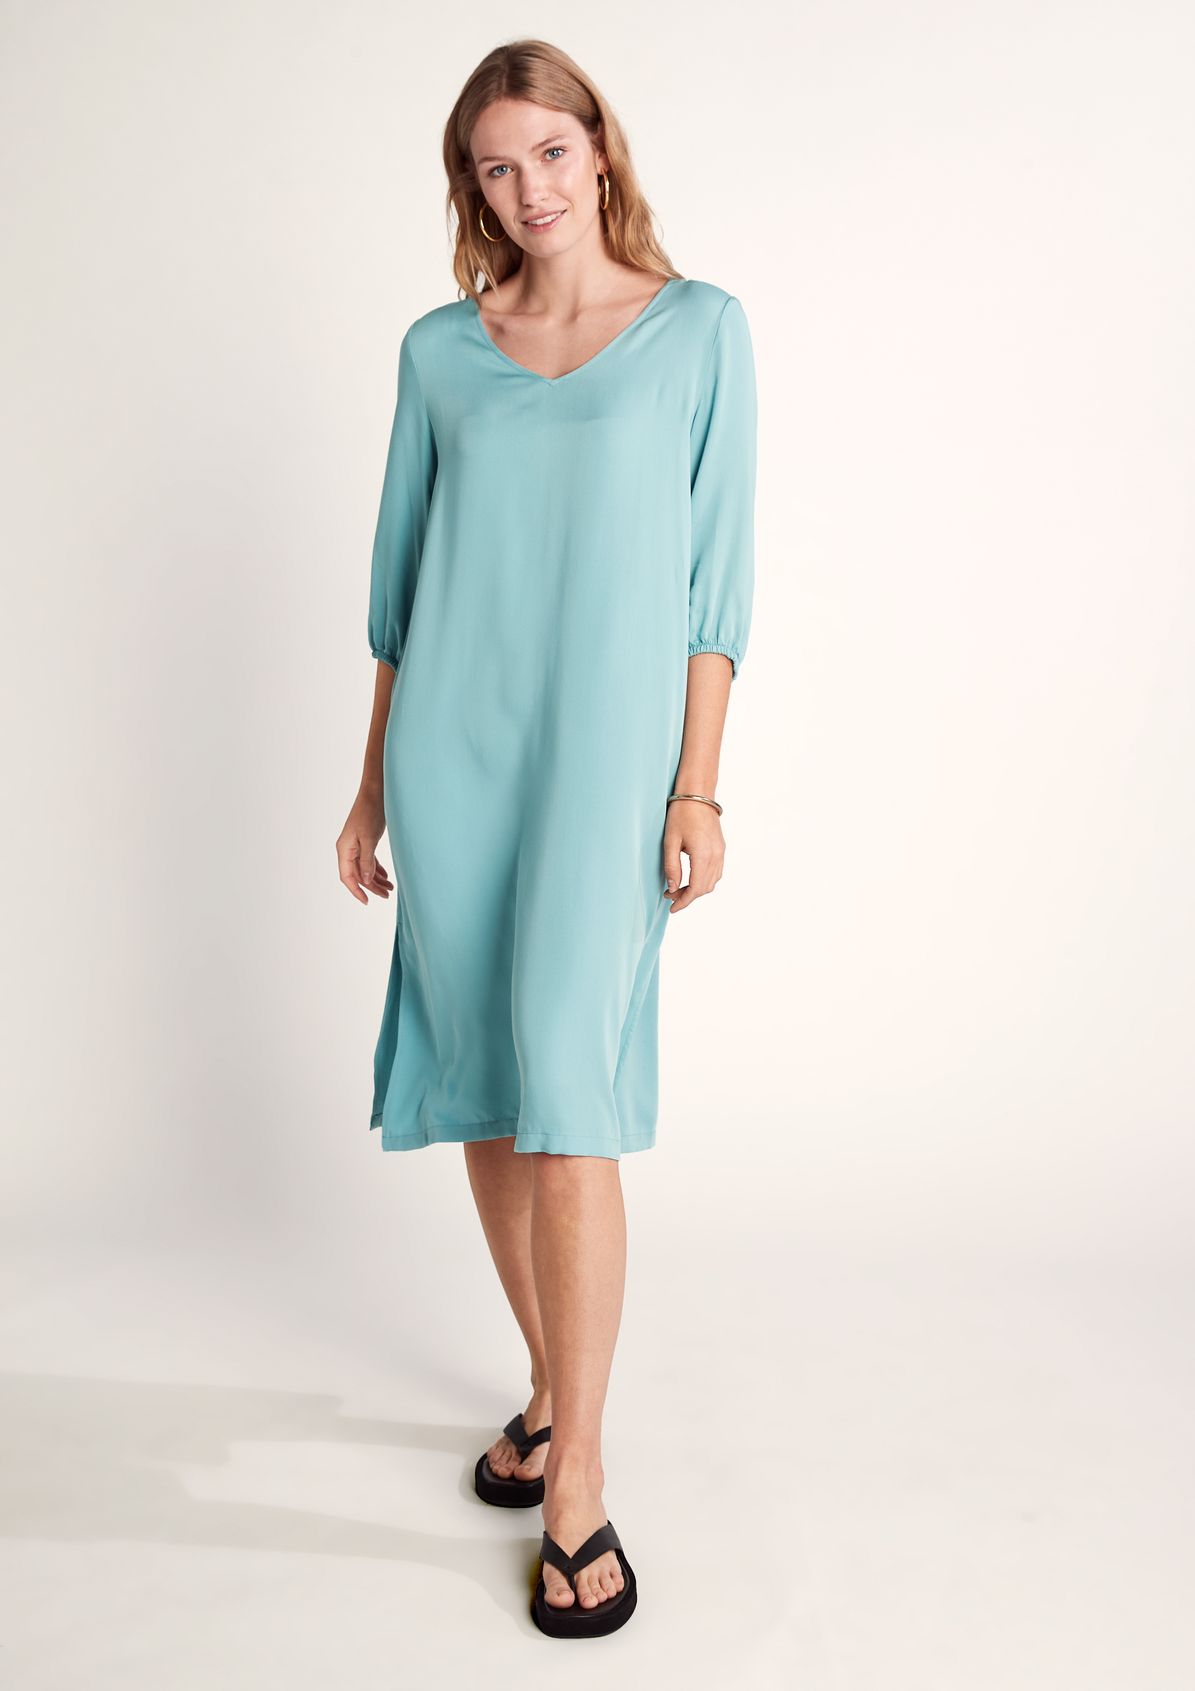 Viscose dress with 3/4-length sleeves from comma